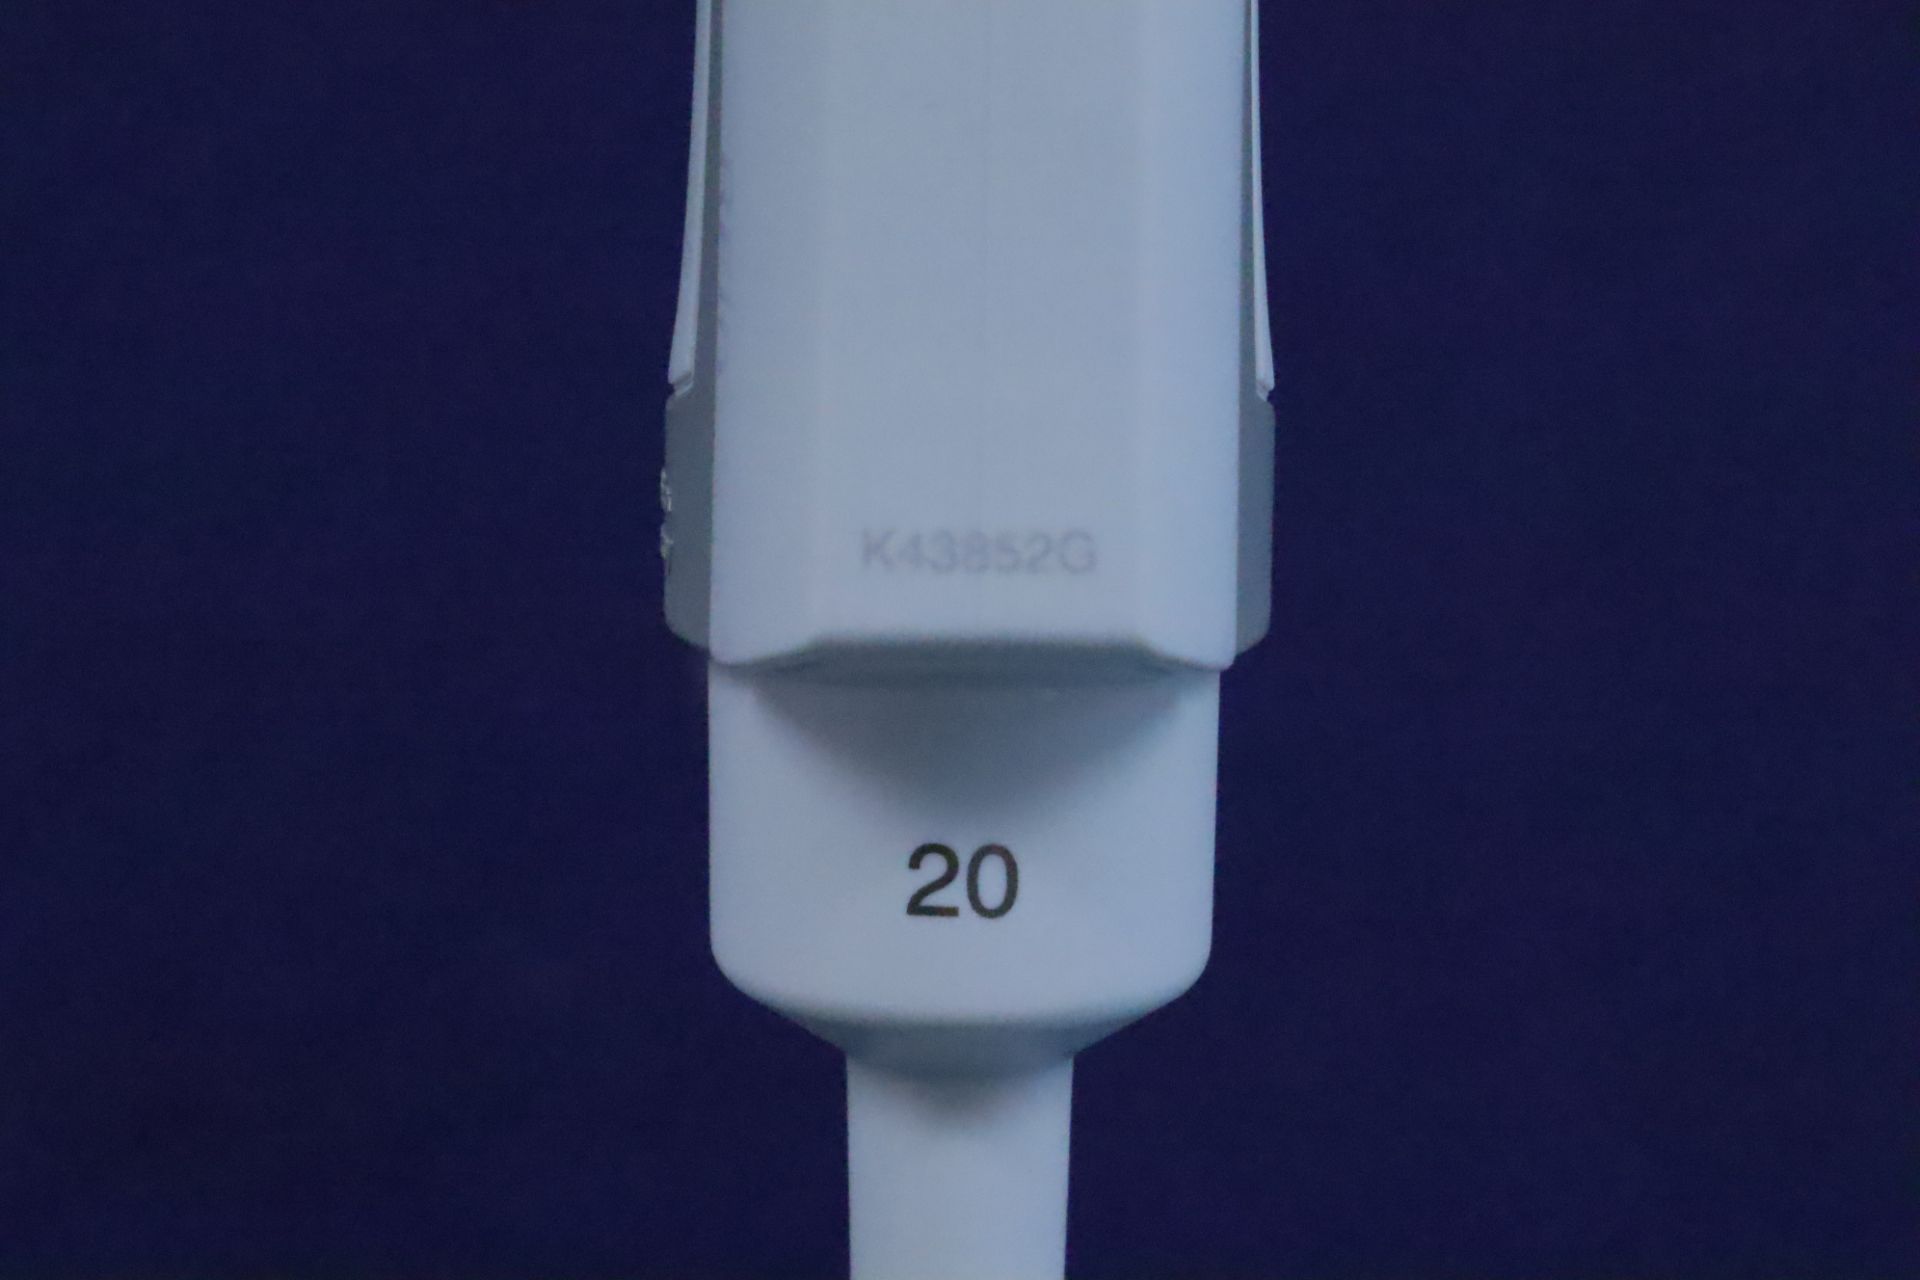 Eppendorf Research Plus Adjustable Volume Pipette 2-20 uL (Qty 2) - Image 5 of 6